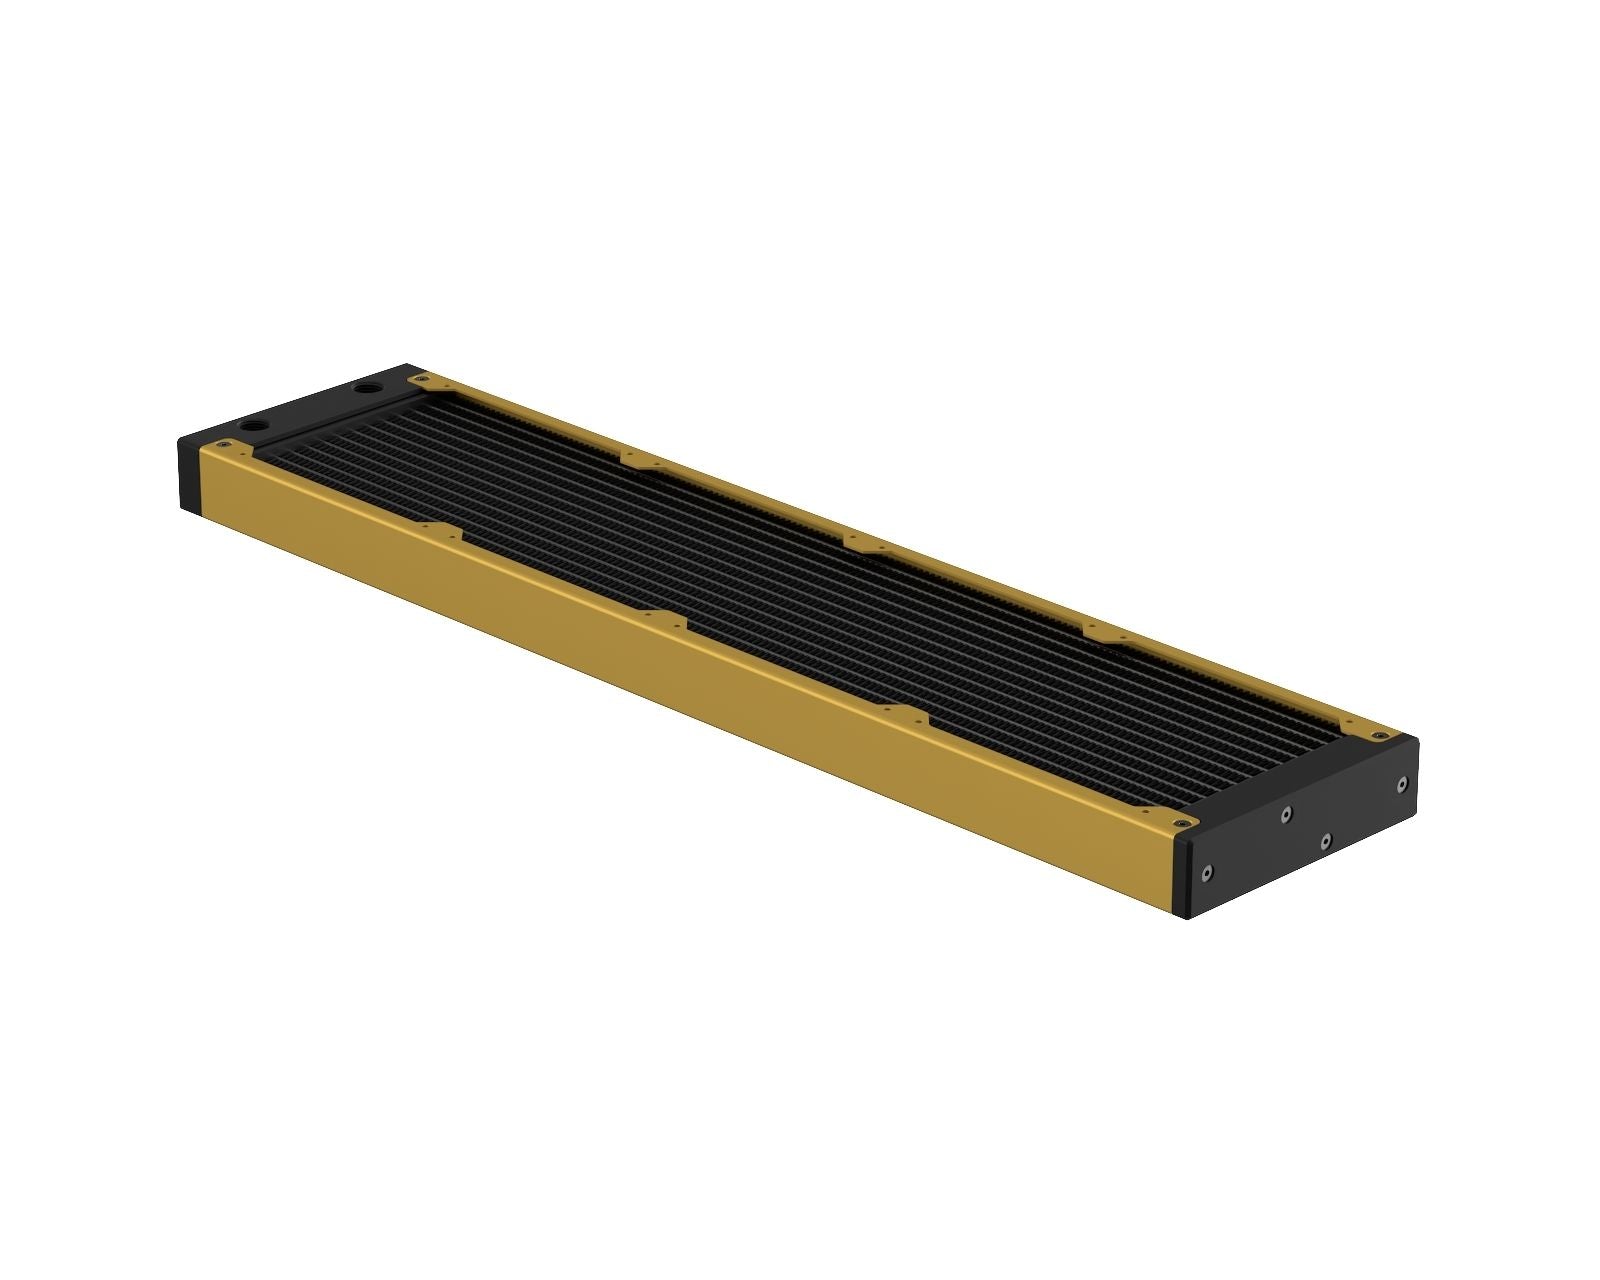 PrimoChill 480SL (30mm) EXIMO Modular Radiator, Black POM, 4x120mm, Quad Fan (R-SL-BK48) Available in 20+ Colors, Assembled in USA and Custom Watercooling Loop Ready - Gold